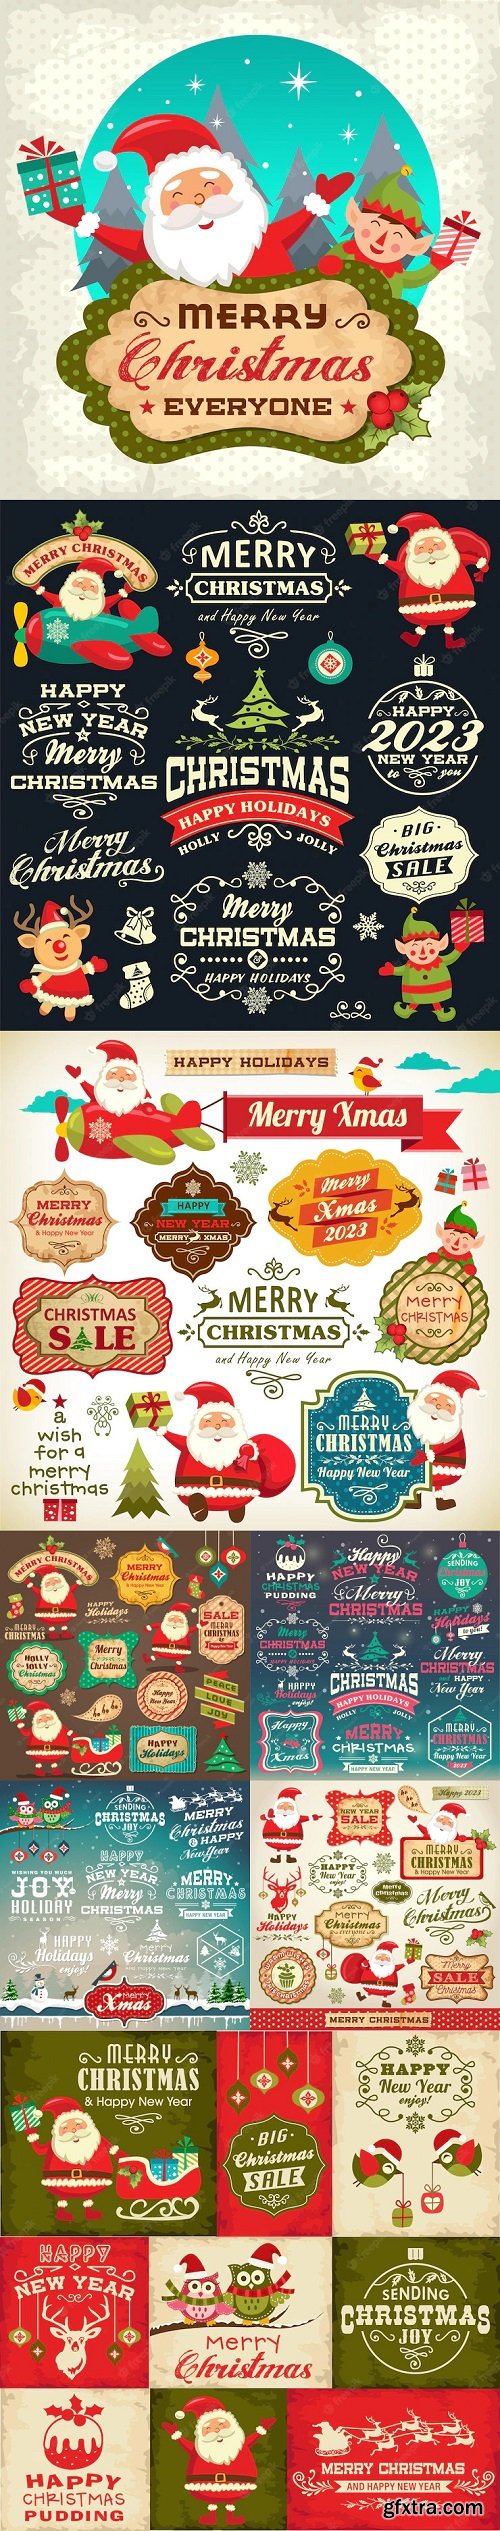 Collection of christmas ornaments and decorative elements, vintage frames, labels, stickers